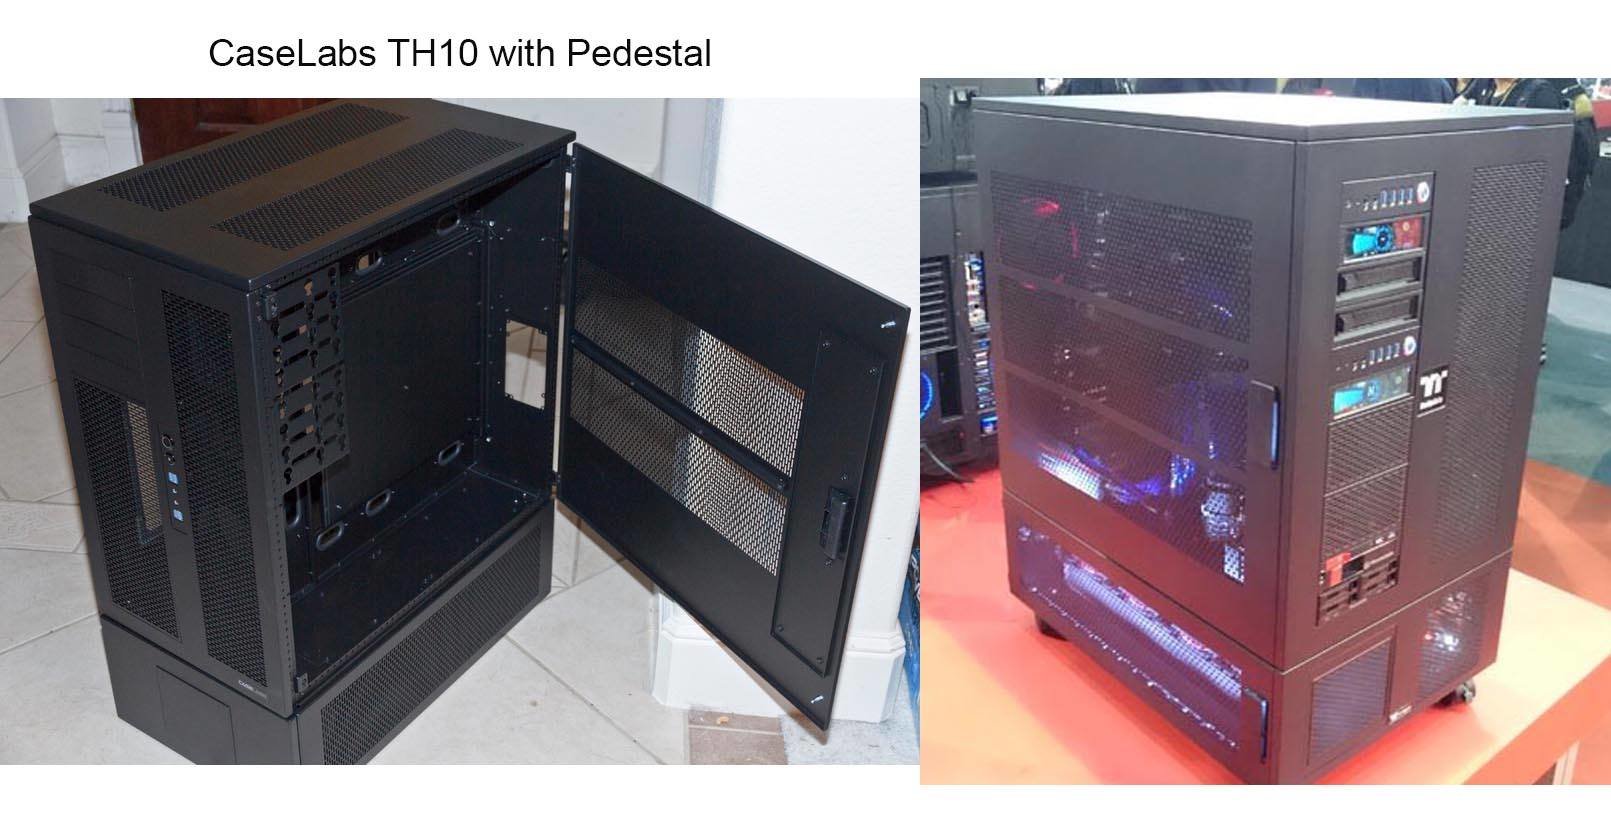 Caselabs TH10 (links) und Thermaltake WP200 (rechts)